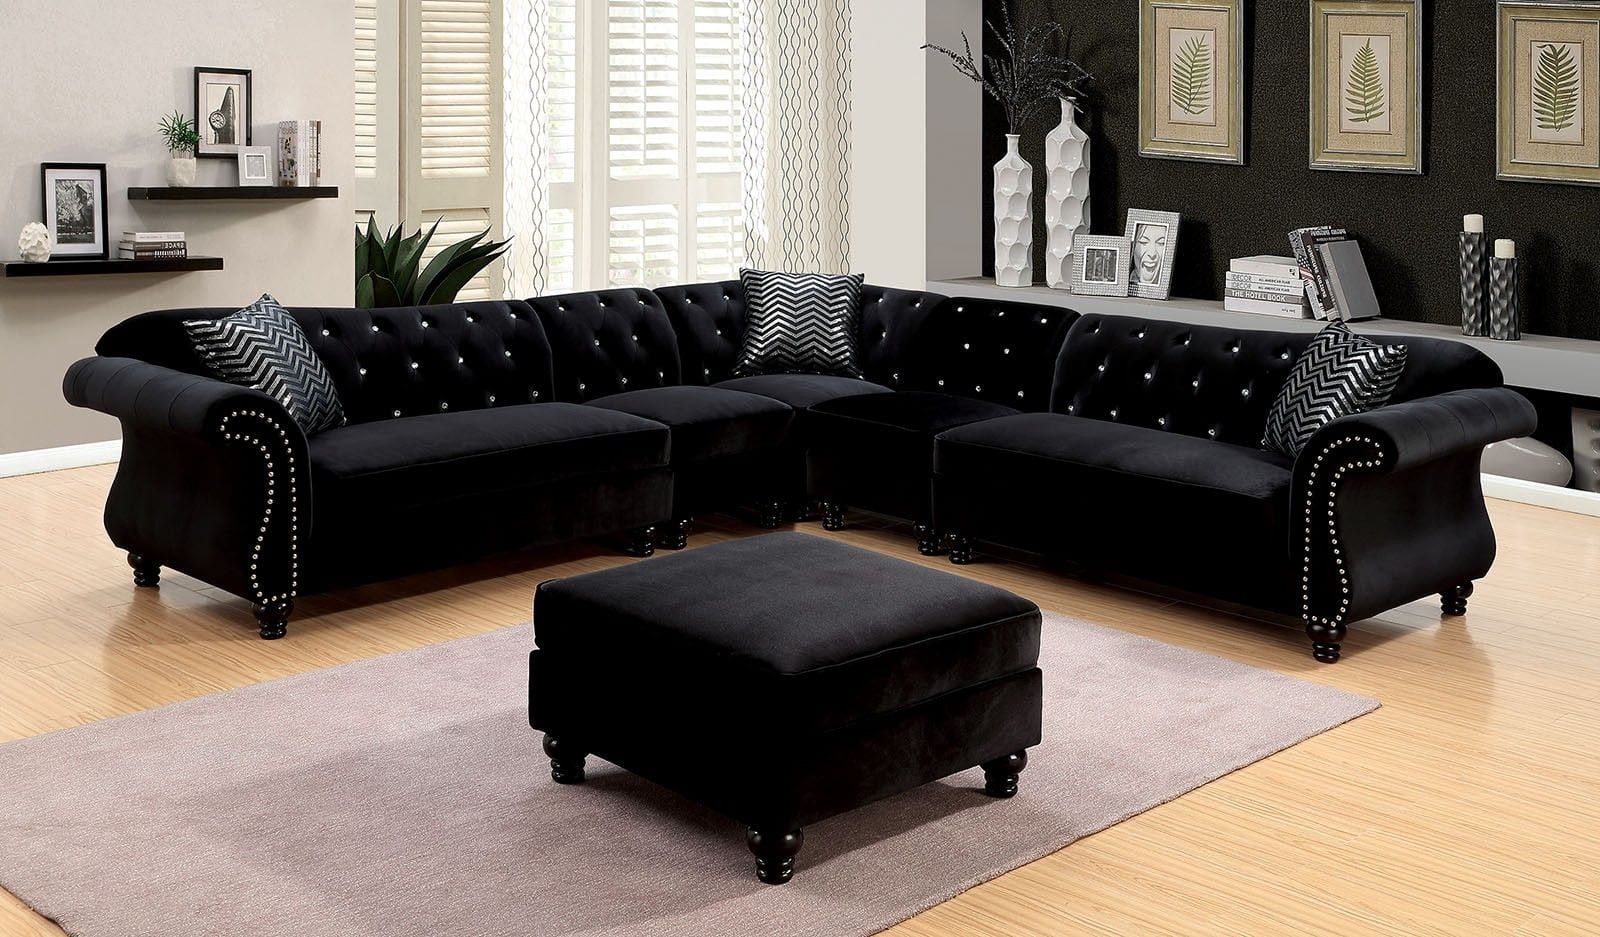 Cm6158bk Jolanda Black Traditional Sectional Sofa – Luchy Amor Furniture With Right Facing Black Sofas (Gallery 10 of 20)